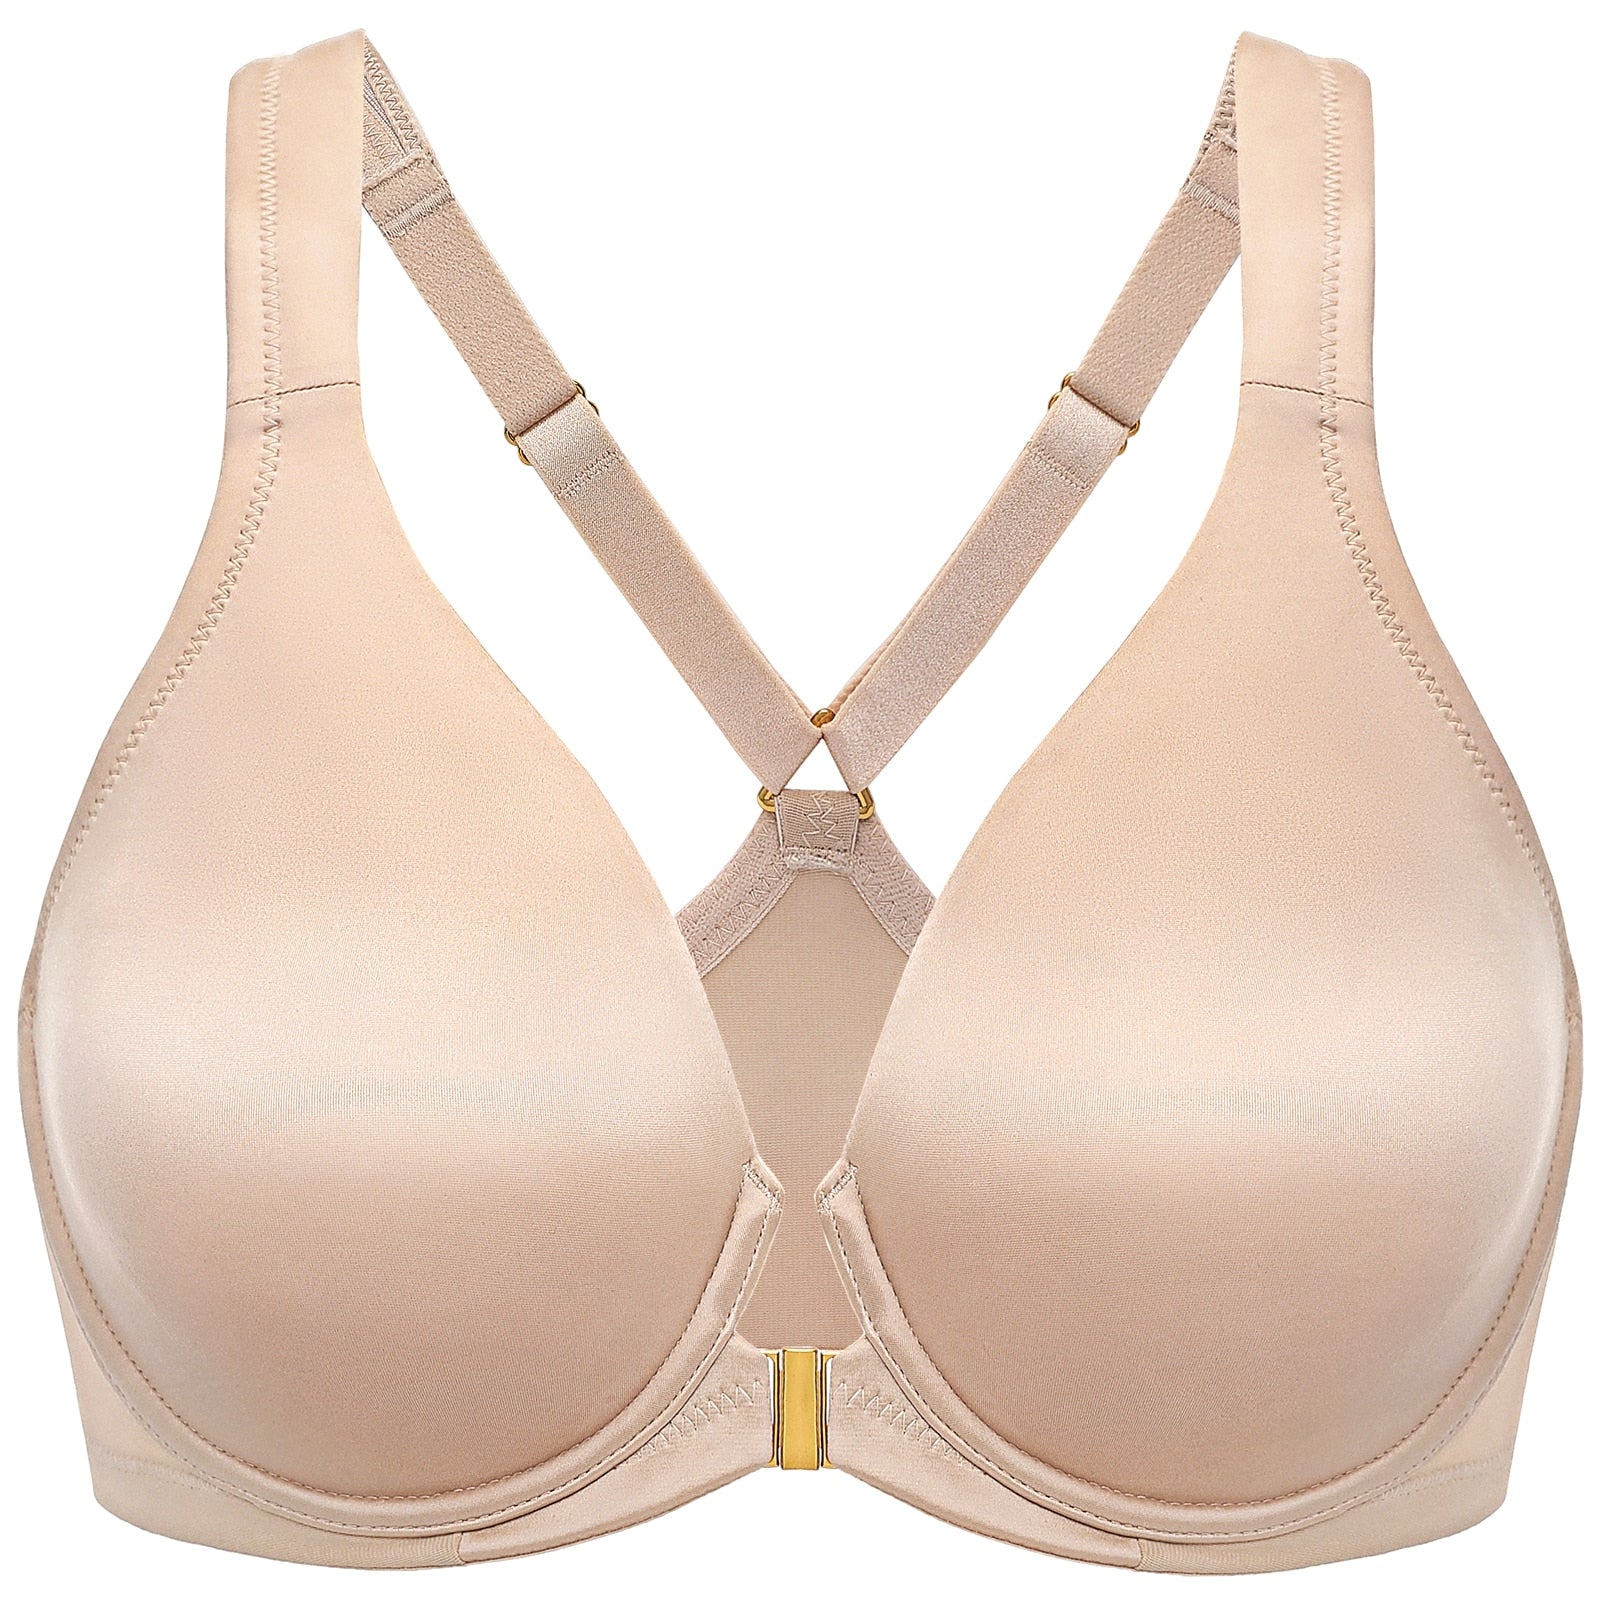 Shop Seamless Bra Front Opening online